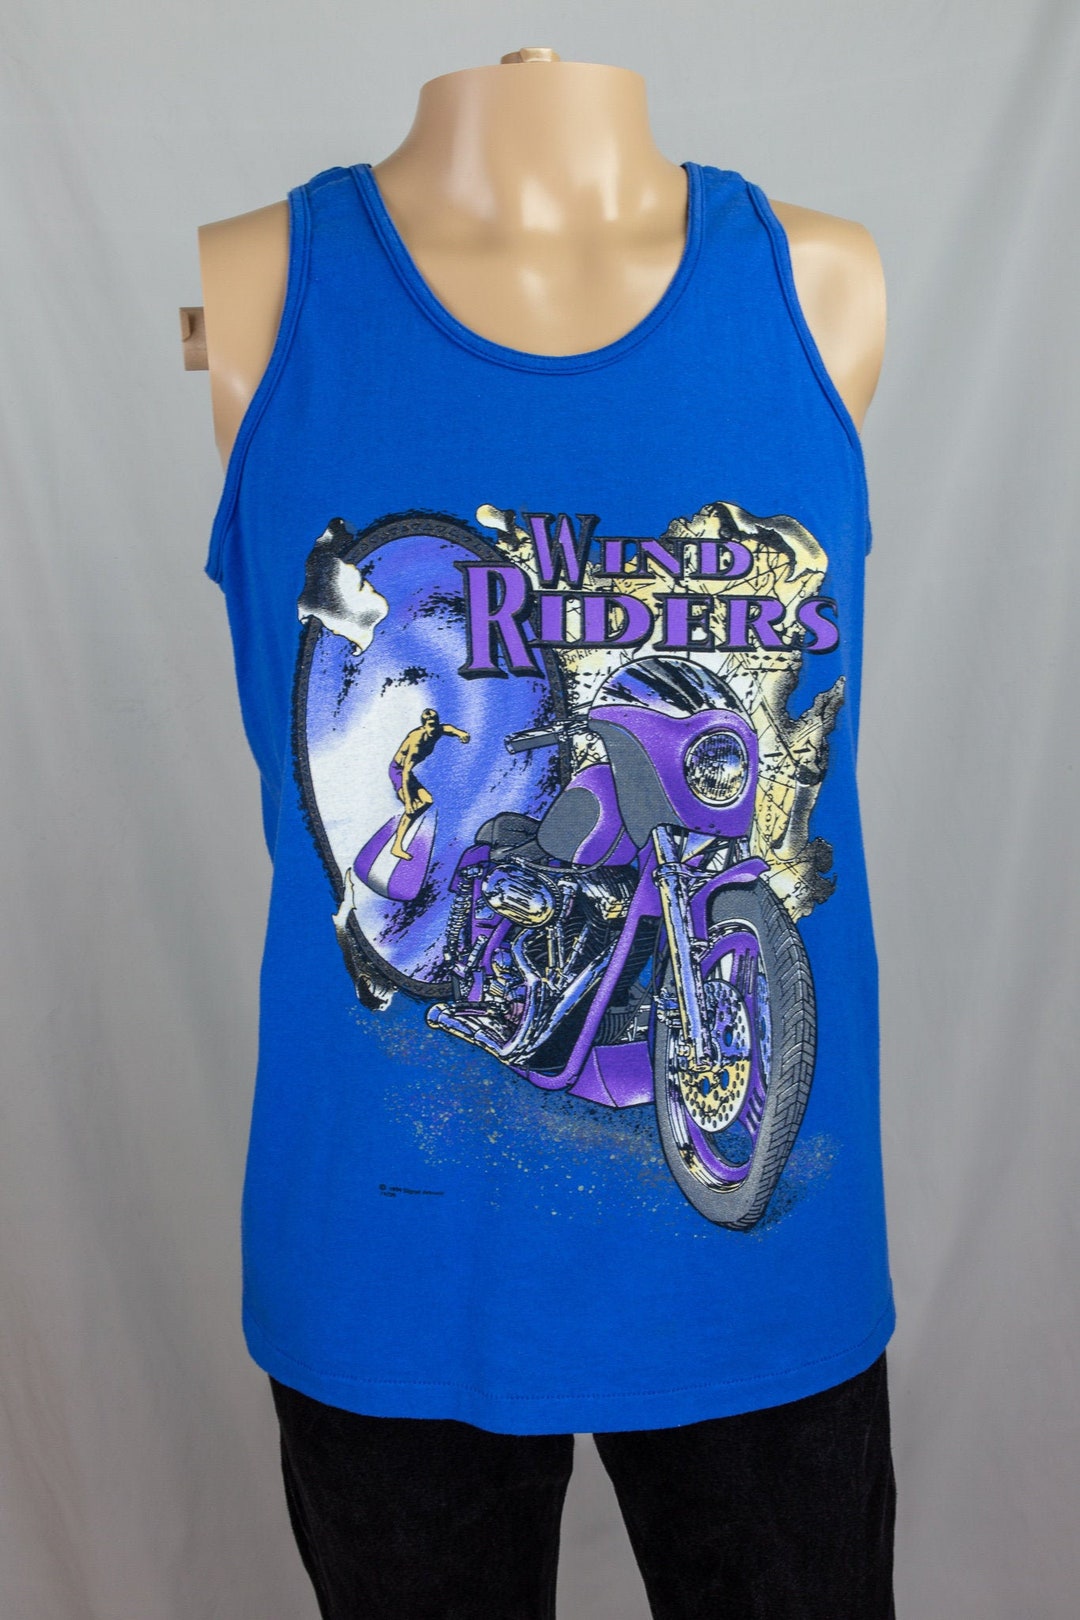 Vintage 90s Signal Sports Wind Riders Surfing Motorcycle Tank Top Size L  Made in USA -  Canada